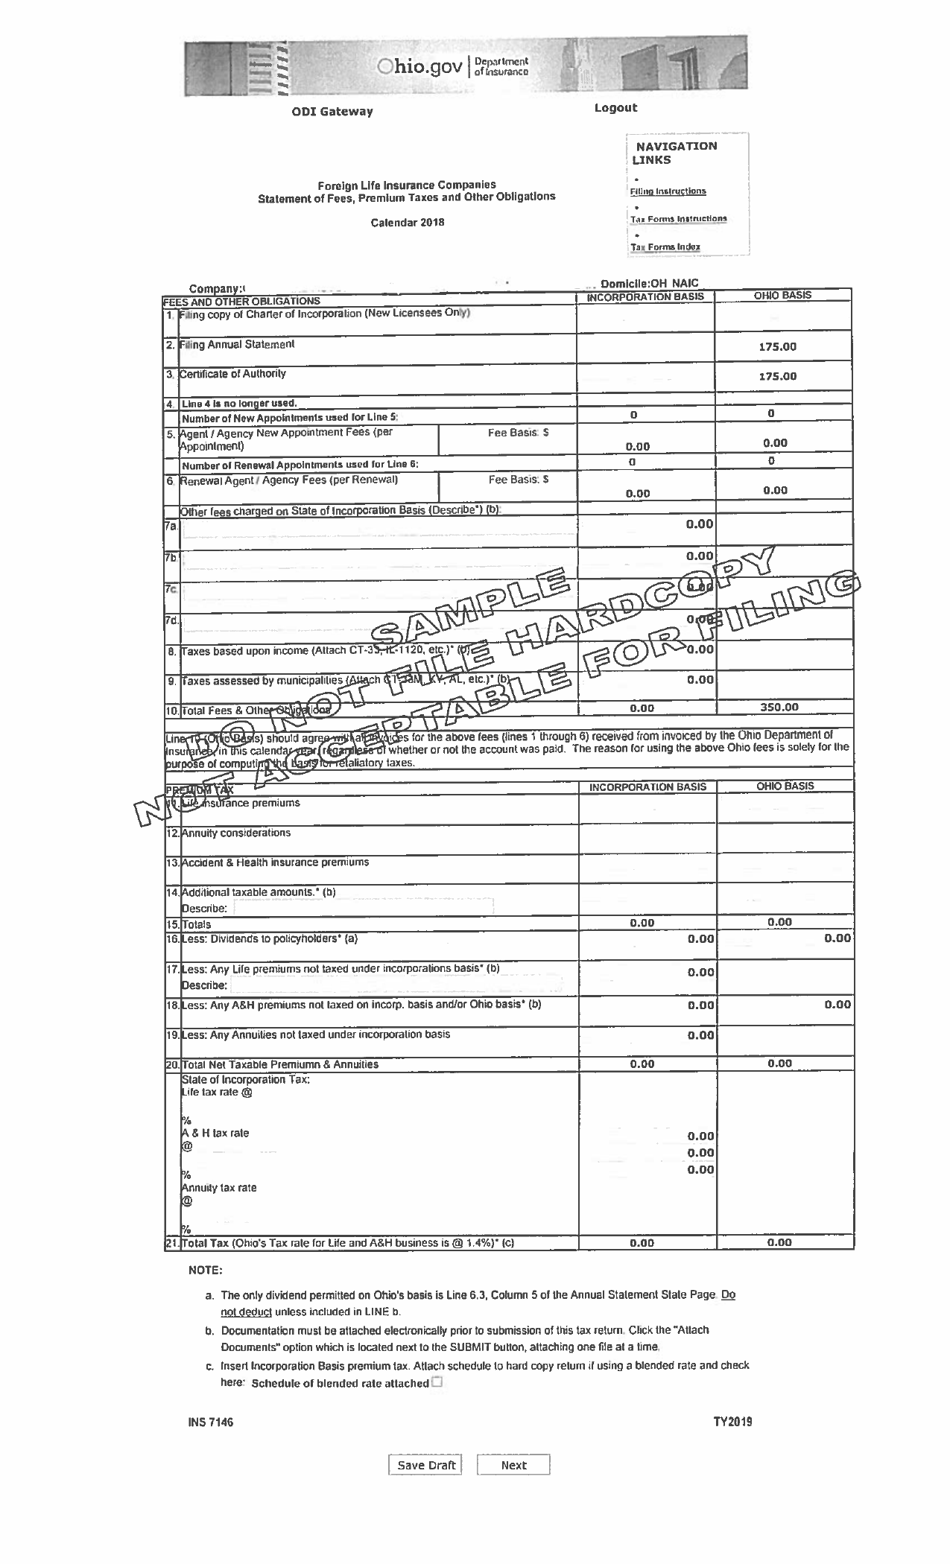 Sample Form INS7146 Foreign Life Insurance Companies Statement of Fees, Premium Taxes and Other Obligations - Ohio, Page 1